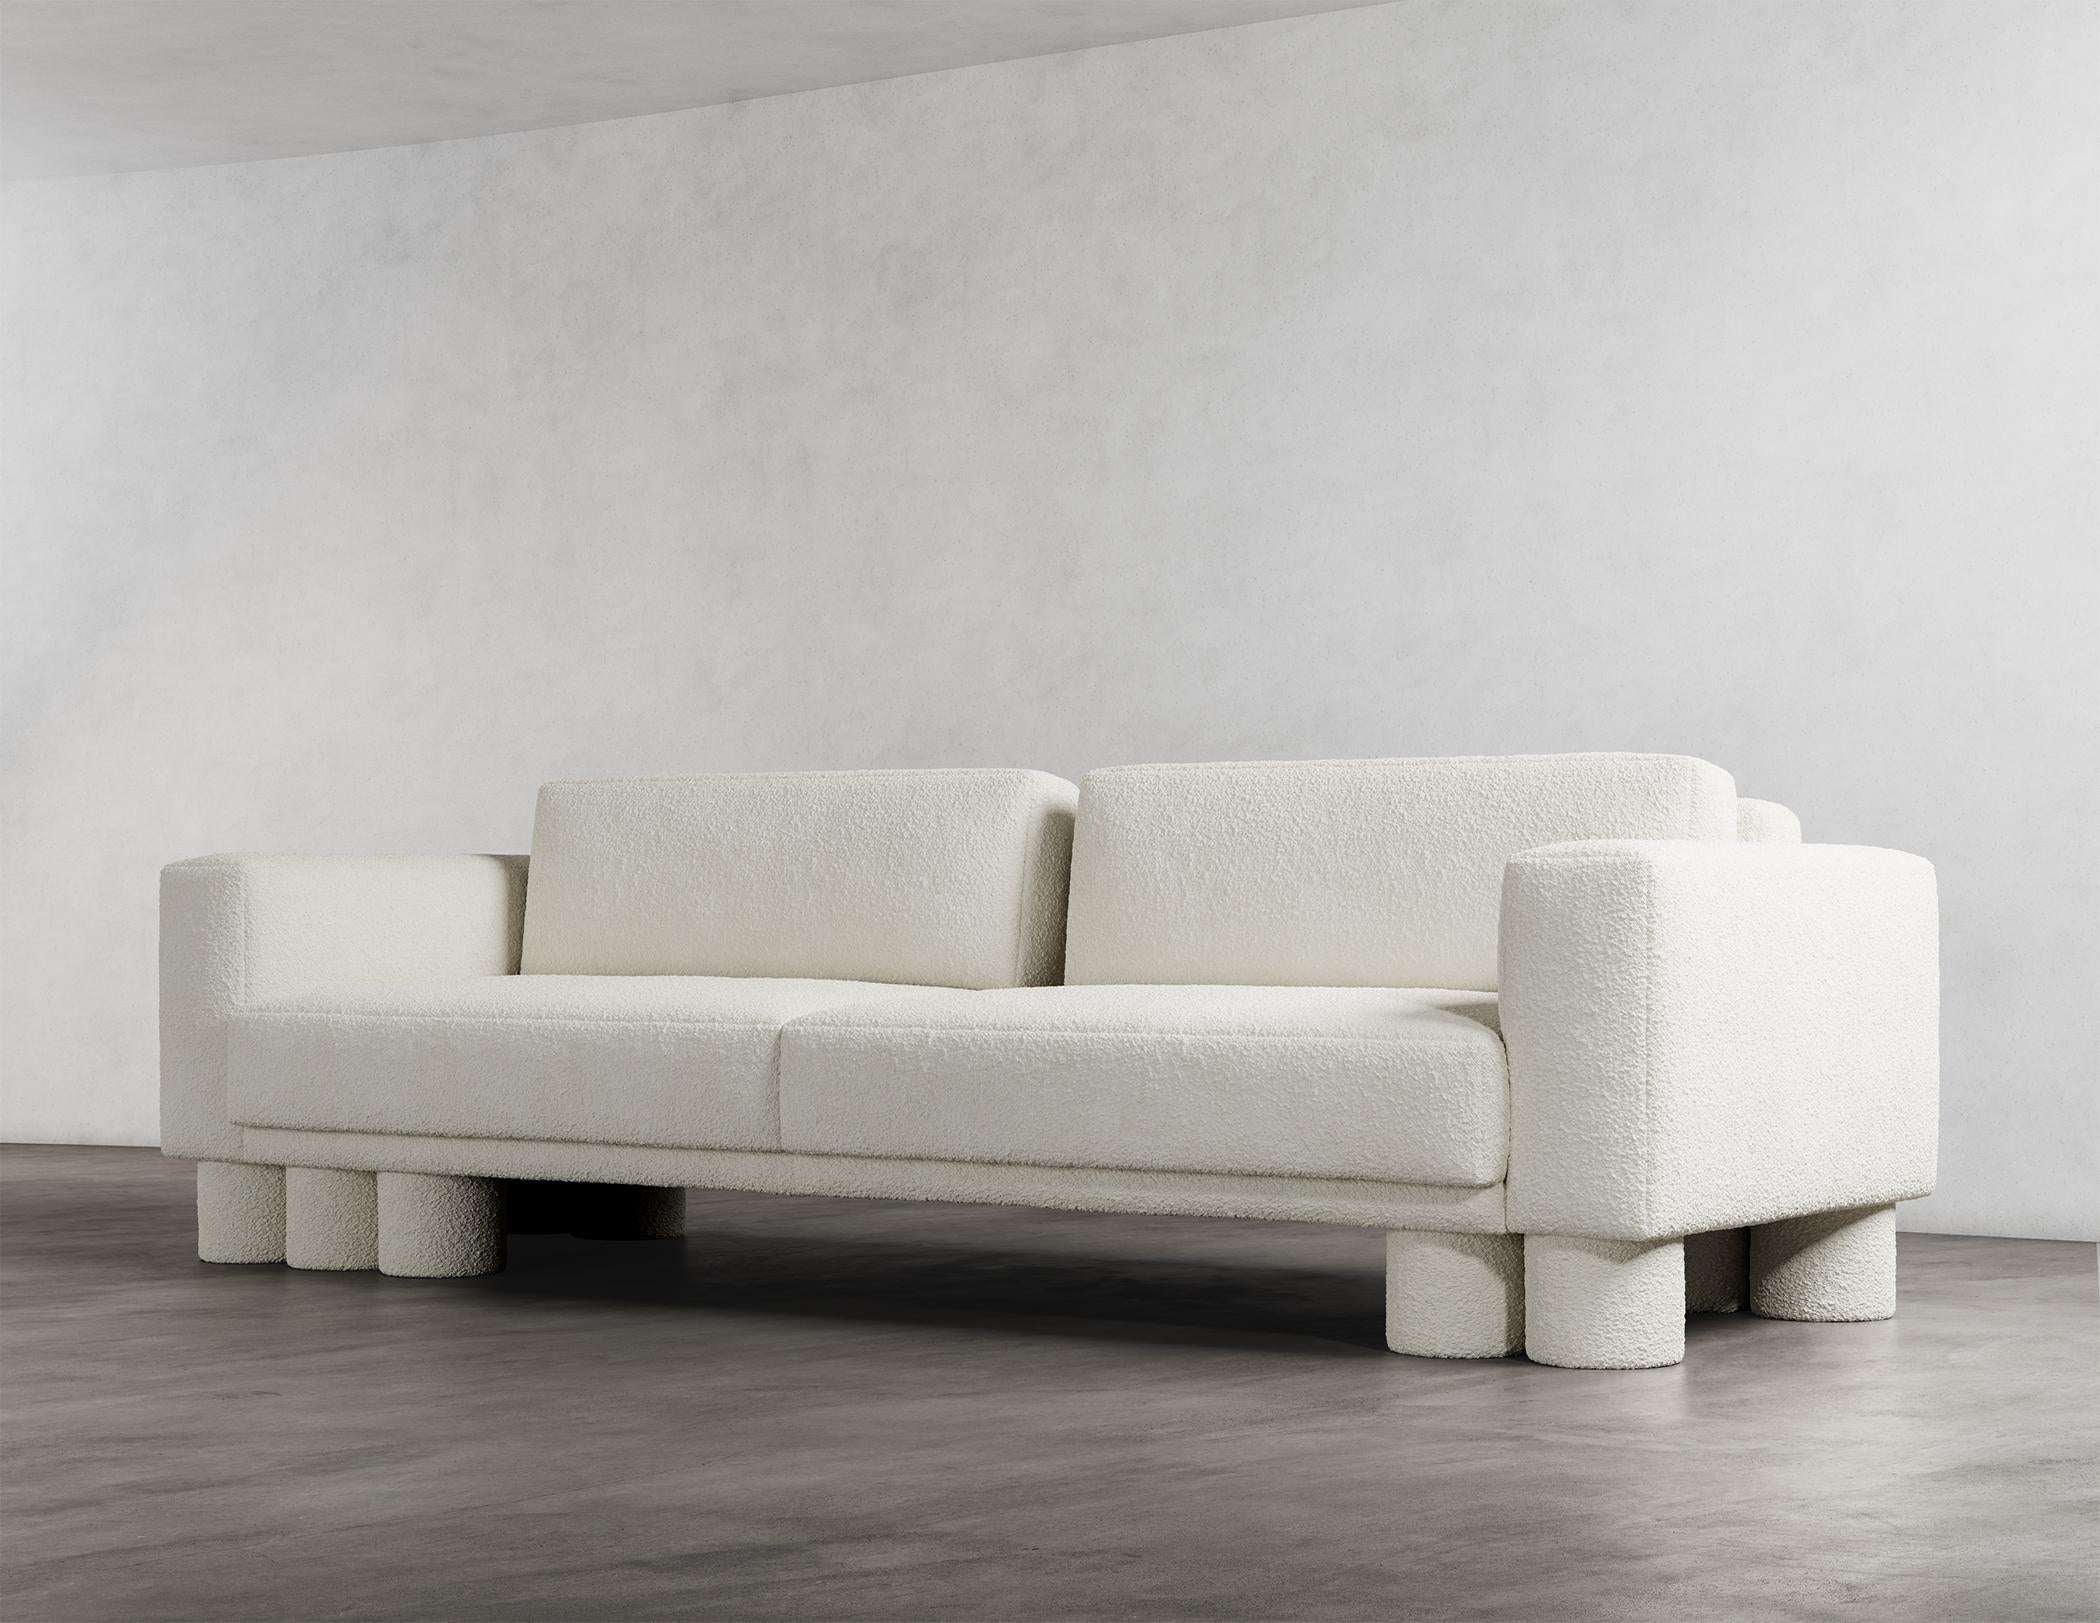 The Pillar Sectional Sofa is a stunning piece of furniture with a unique and captivating design. It is characterized by layered, asymmetrical design elements that create a sense of sophistication and simplicity. The deliberate imbalance in these